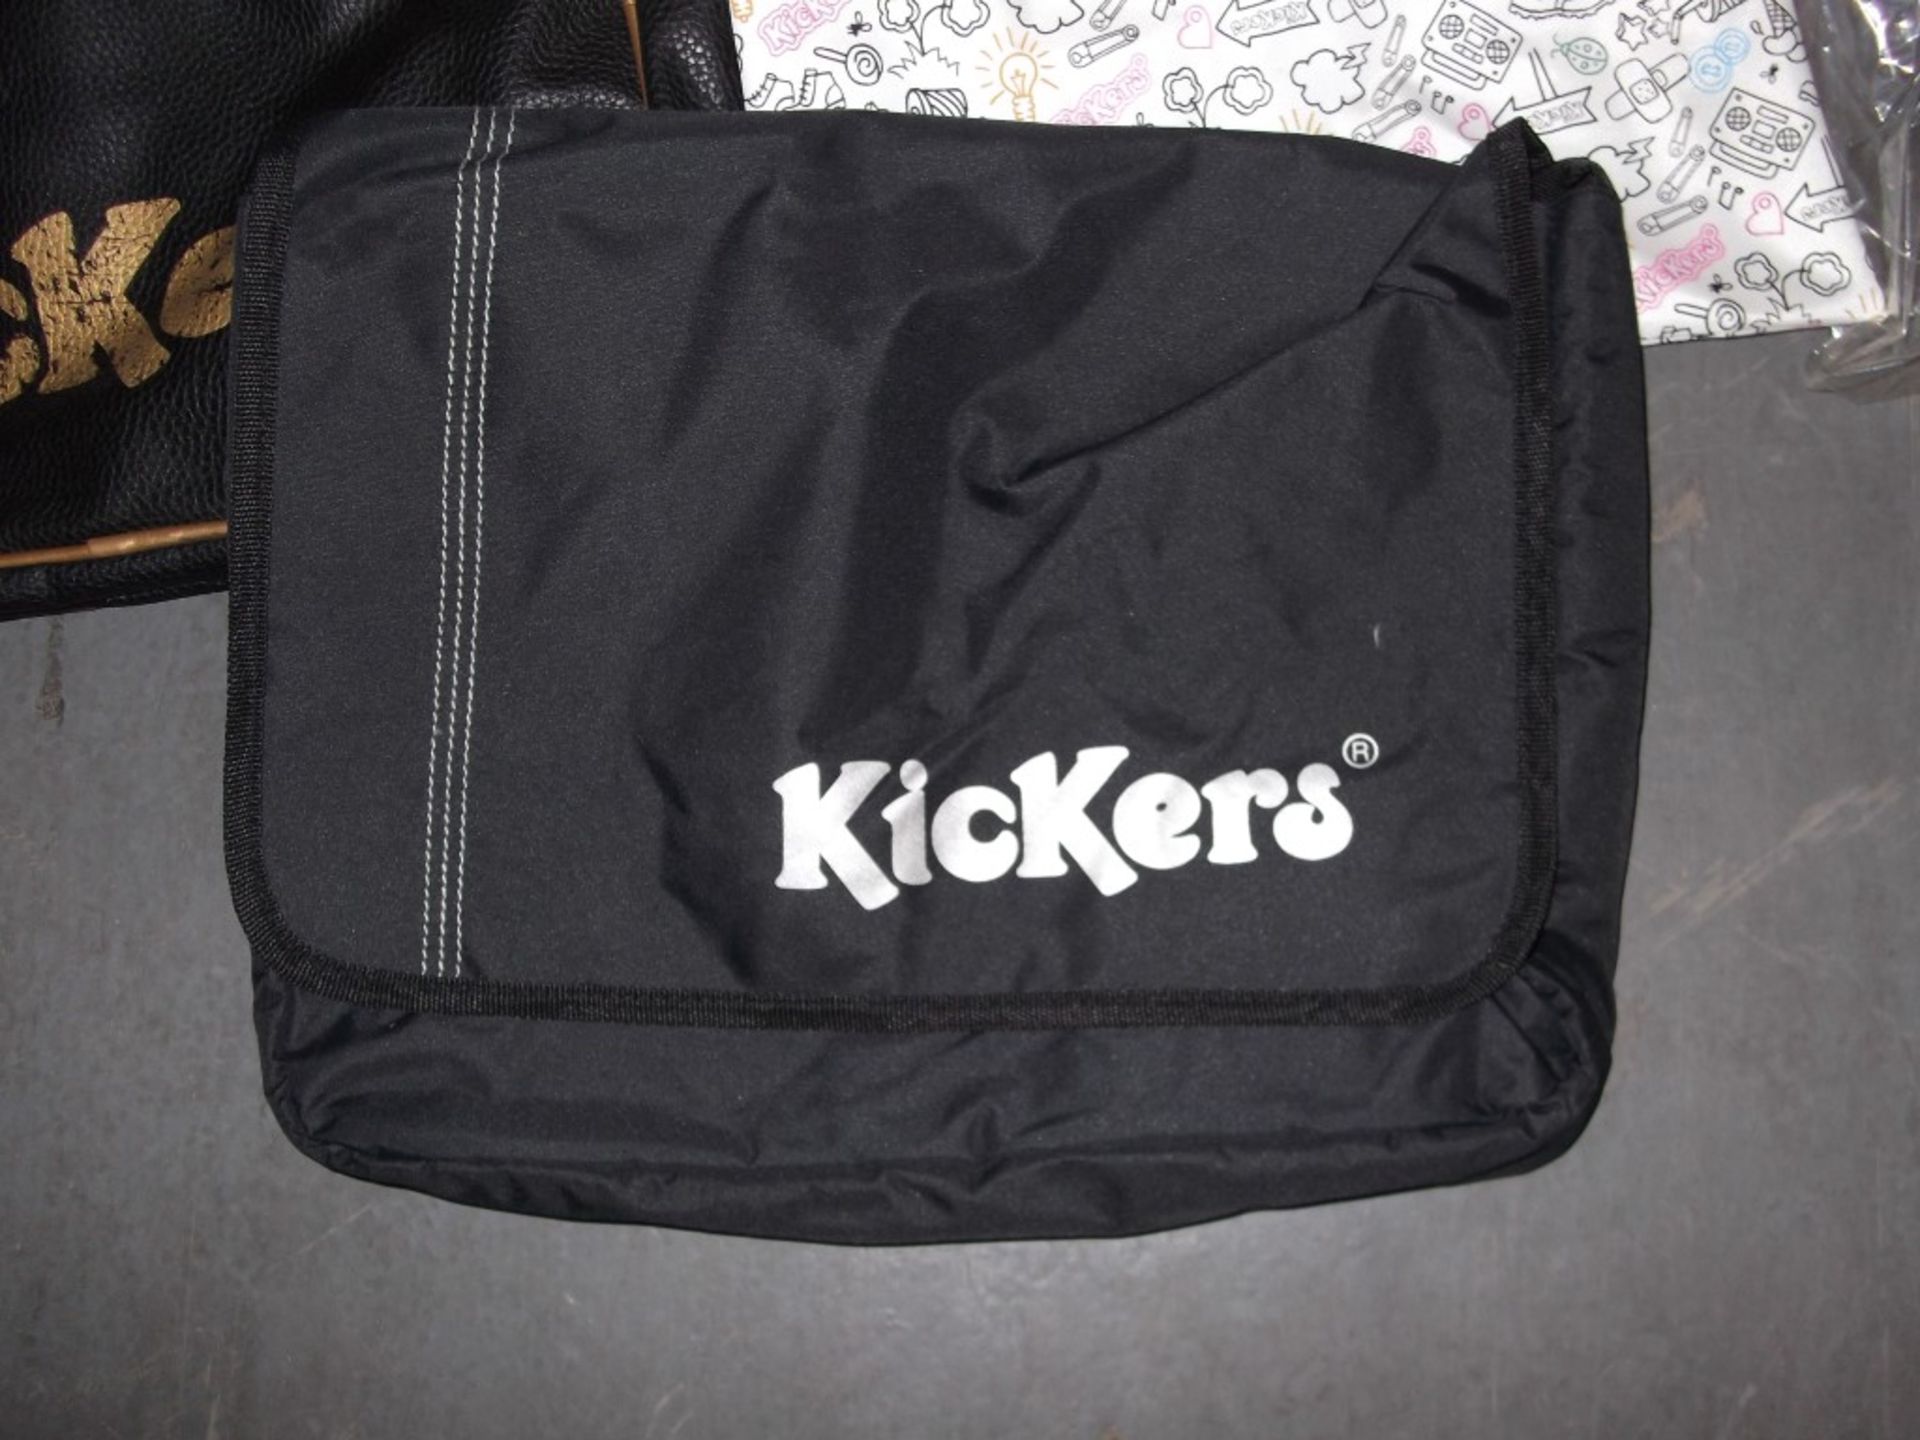 11 x Kickers Bags - NJB069 - CL008 - Location: Bury BL9 - RRP £492  - NEW - Image 2 of 3